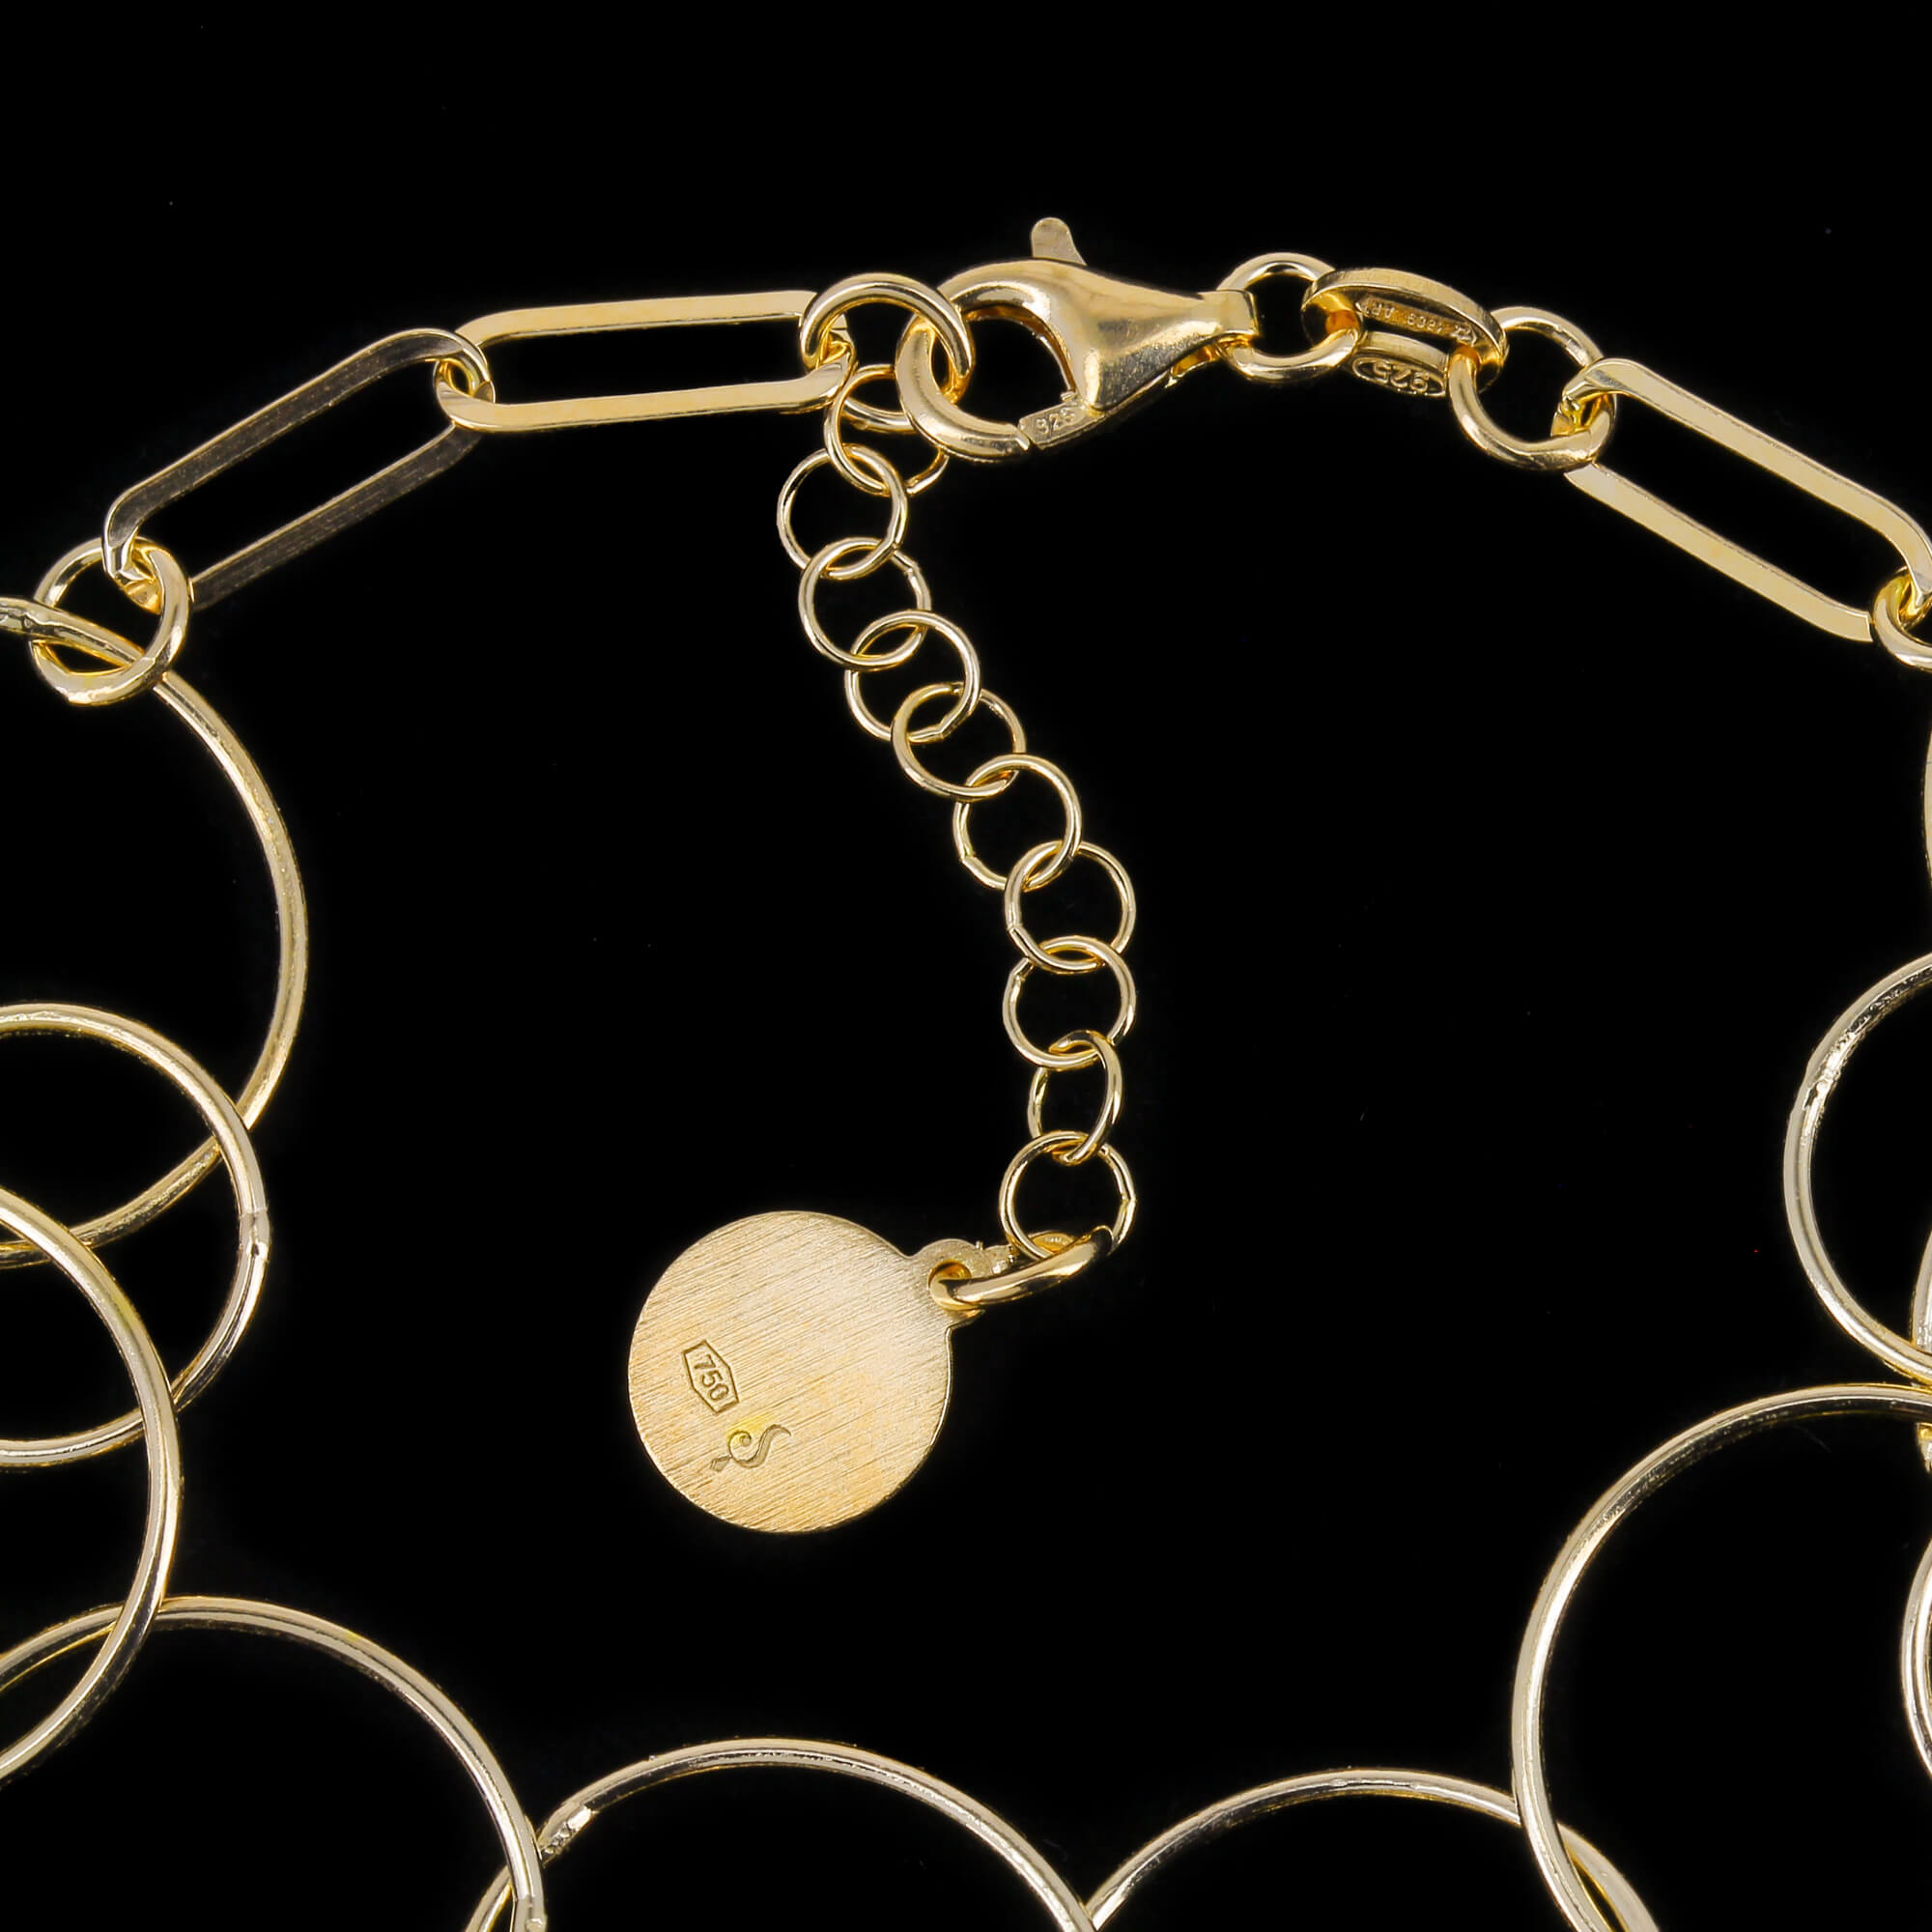 Open and closed round Gilded Switch Bracelet